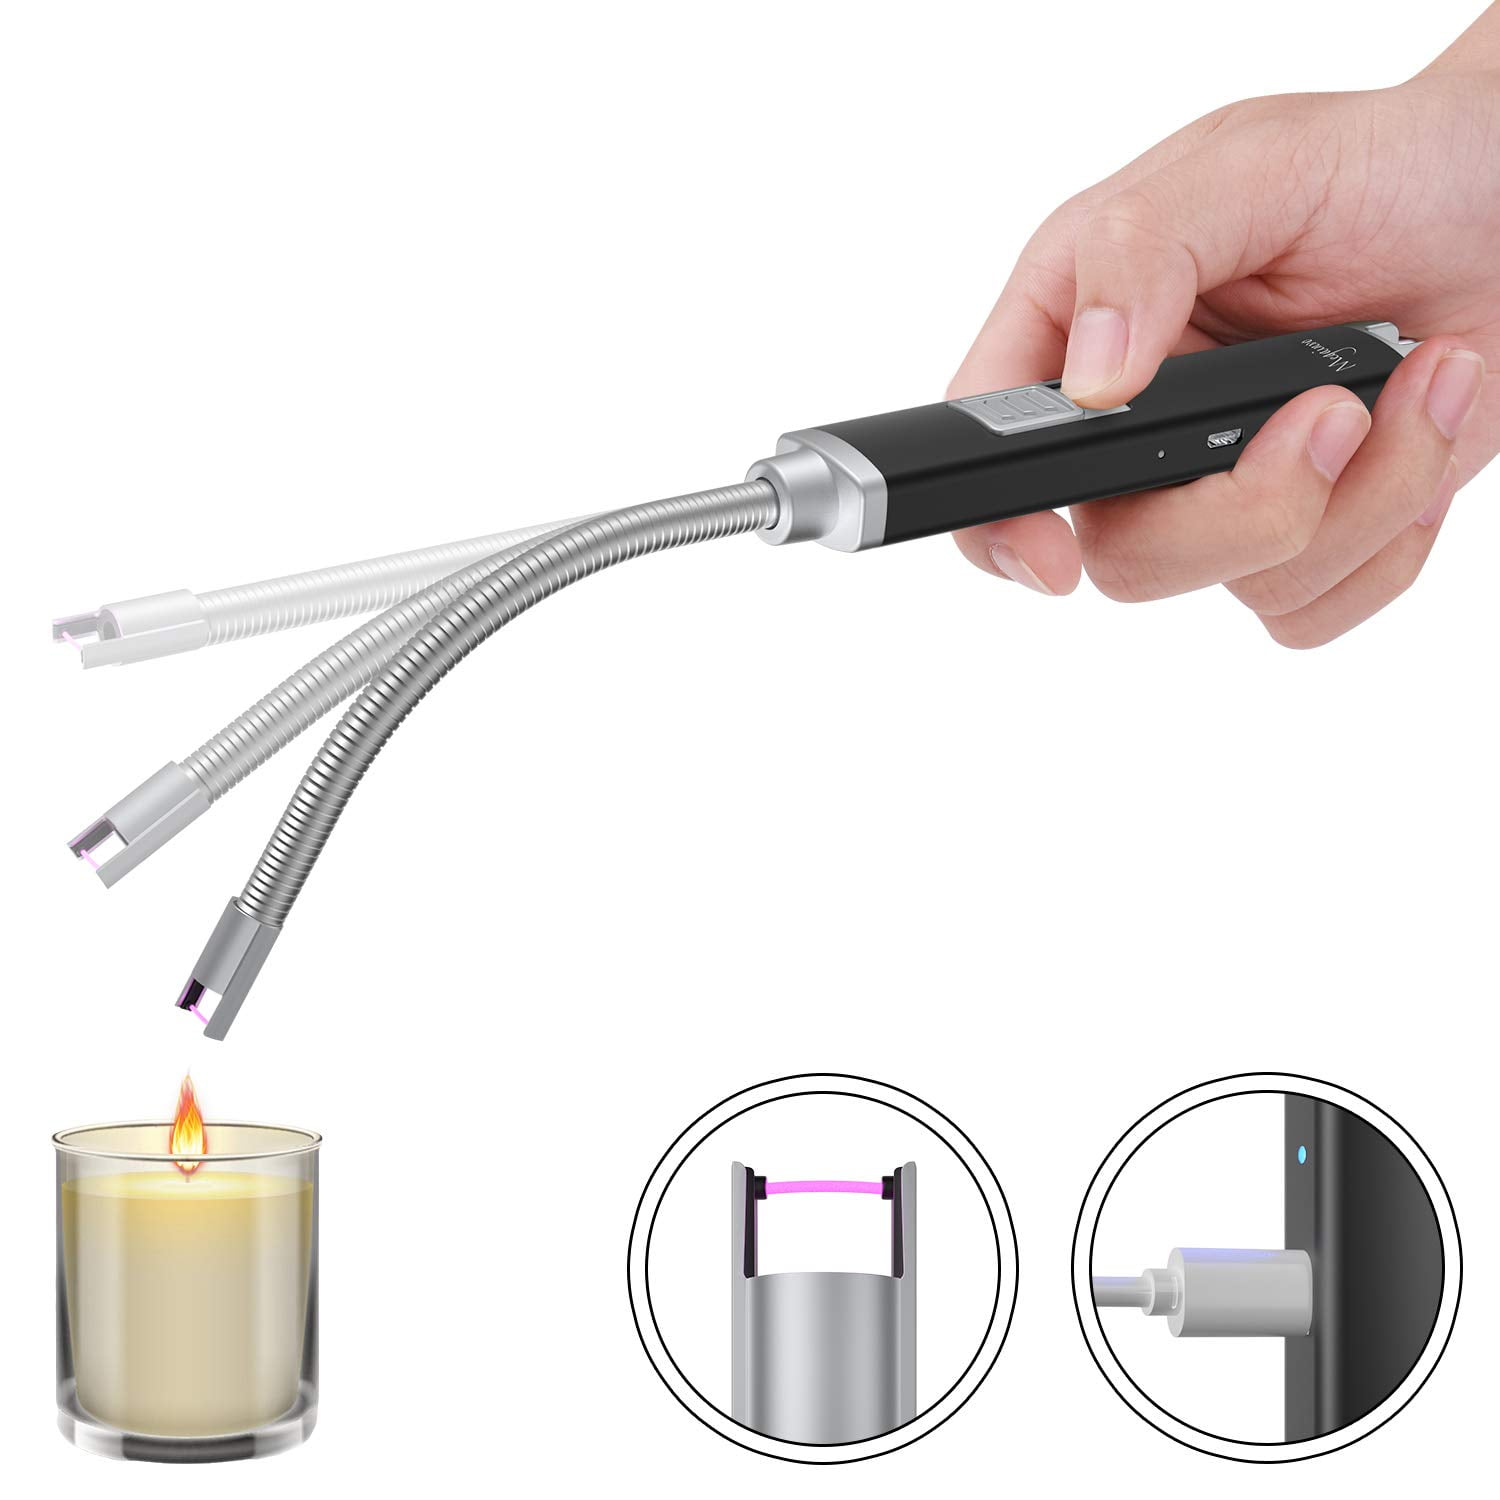 FLAMEJACK BARGAIN4LESSS 2 x BBQ Lighters Gas Cooker Oven Stove Clicker Lighter Camping Refillable Candle